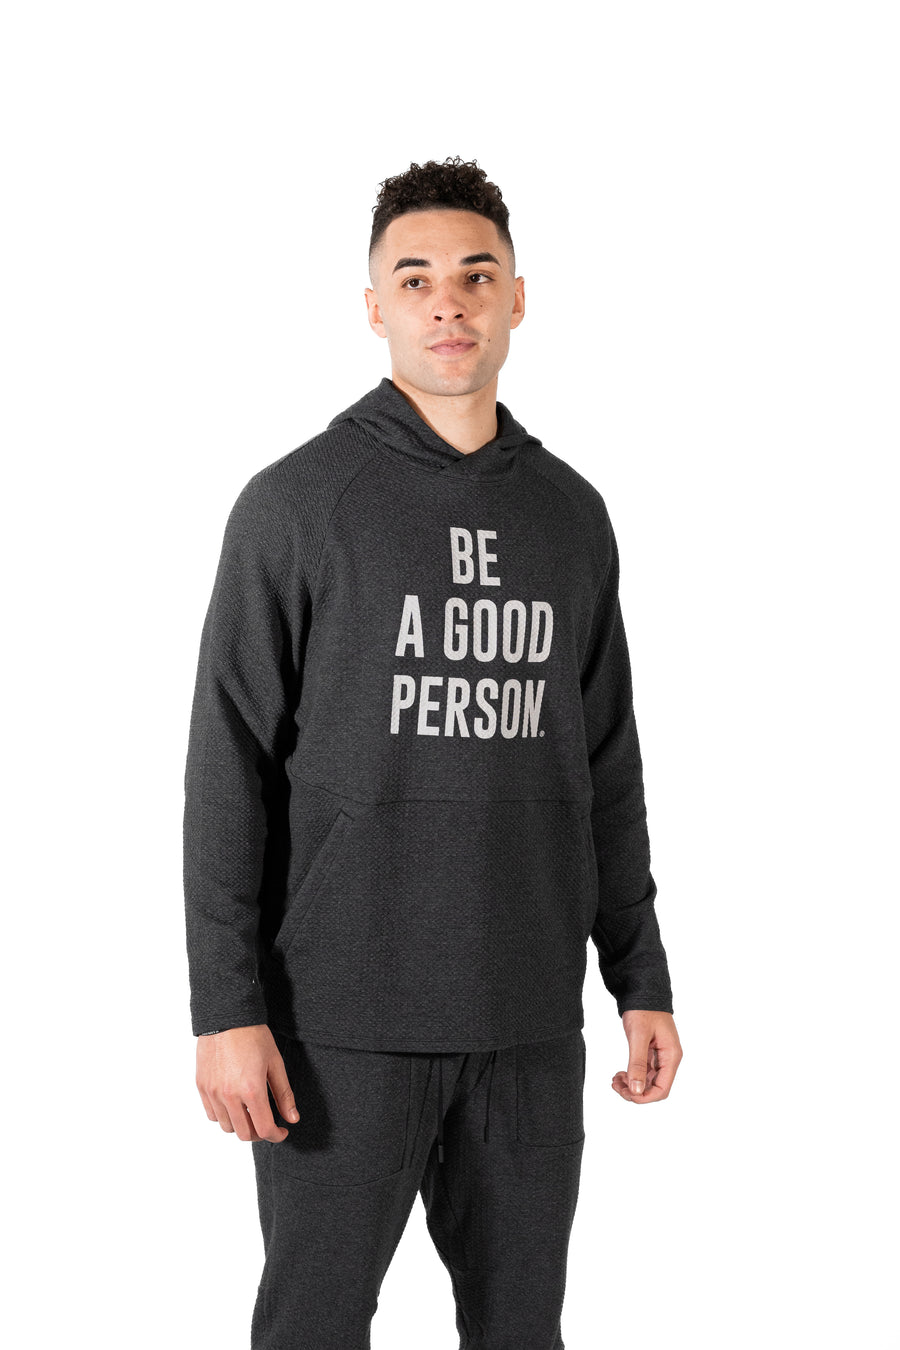 At Ease Textured Double Knit Hoodie - Heathered Black/Black - lululemon // BE A GOOD PERSON